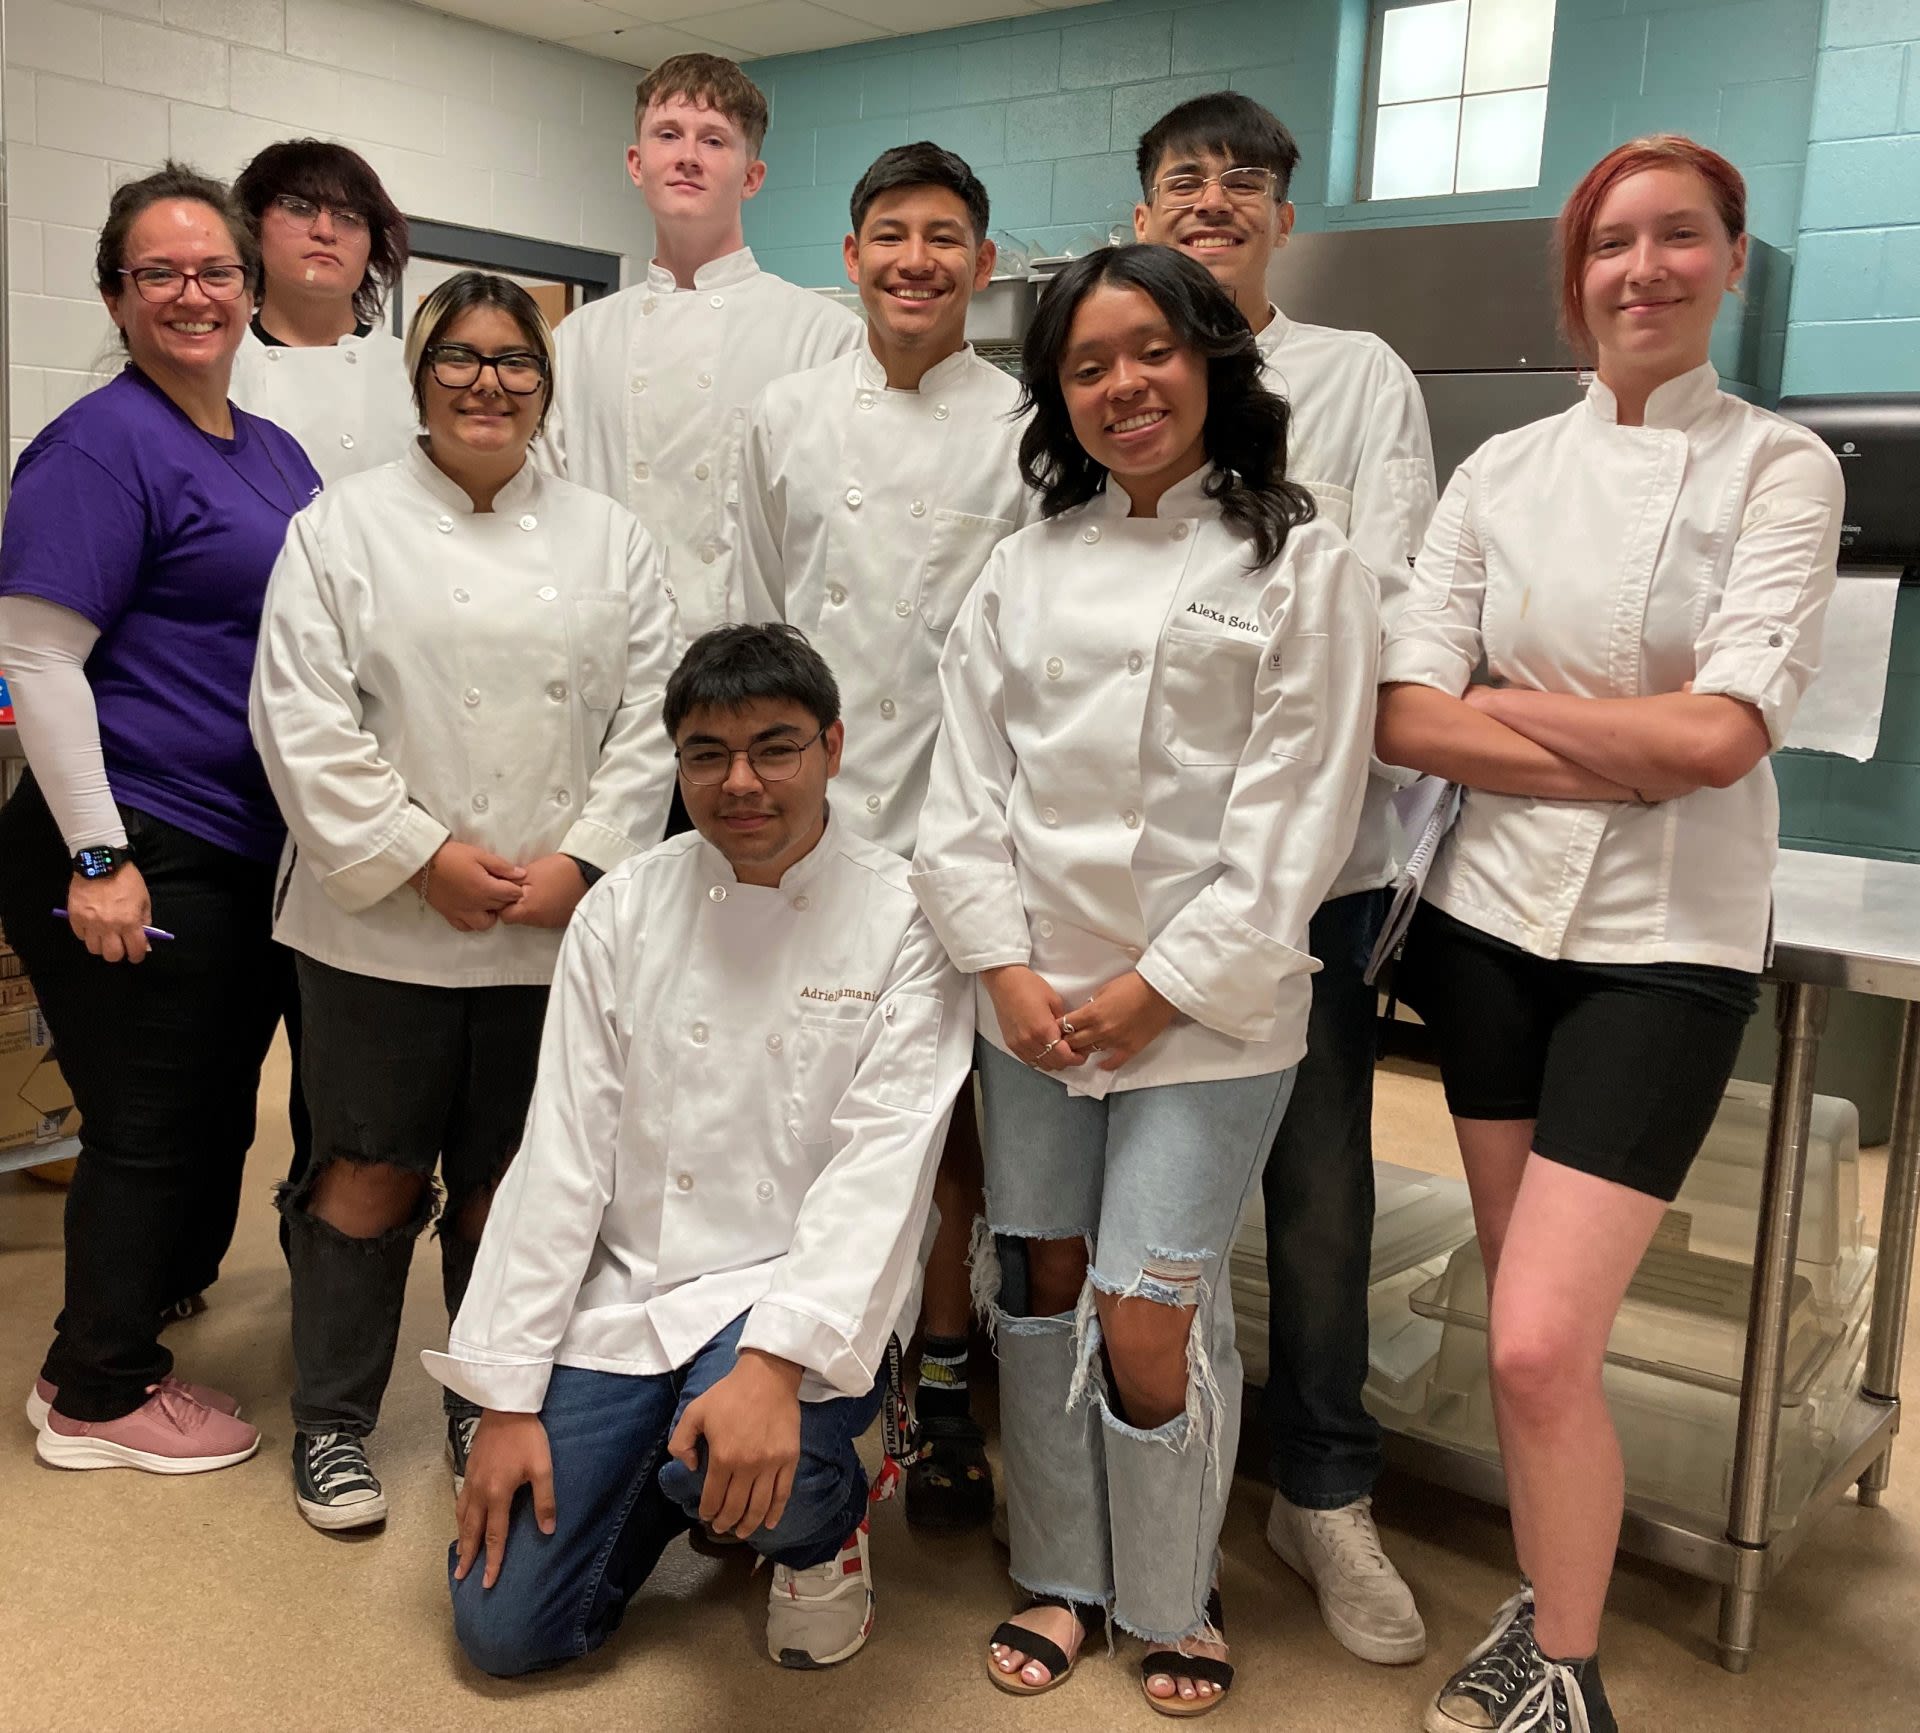 ECISD teams place well in BBQ contest